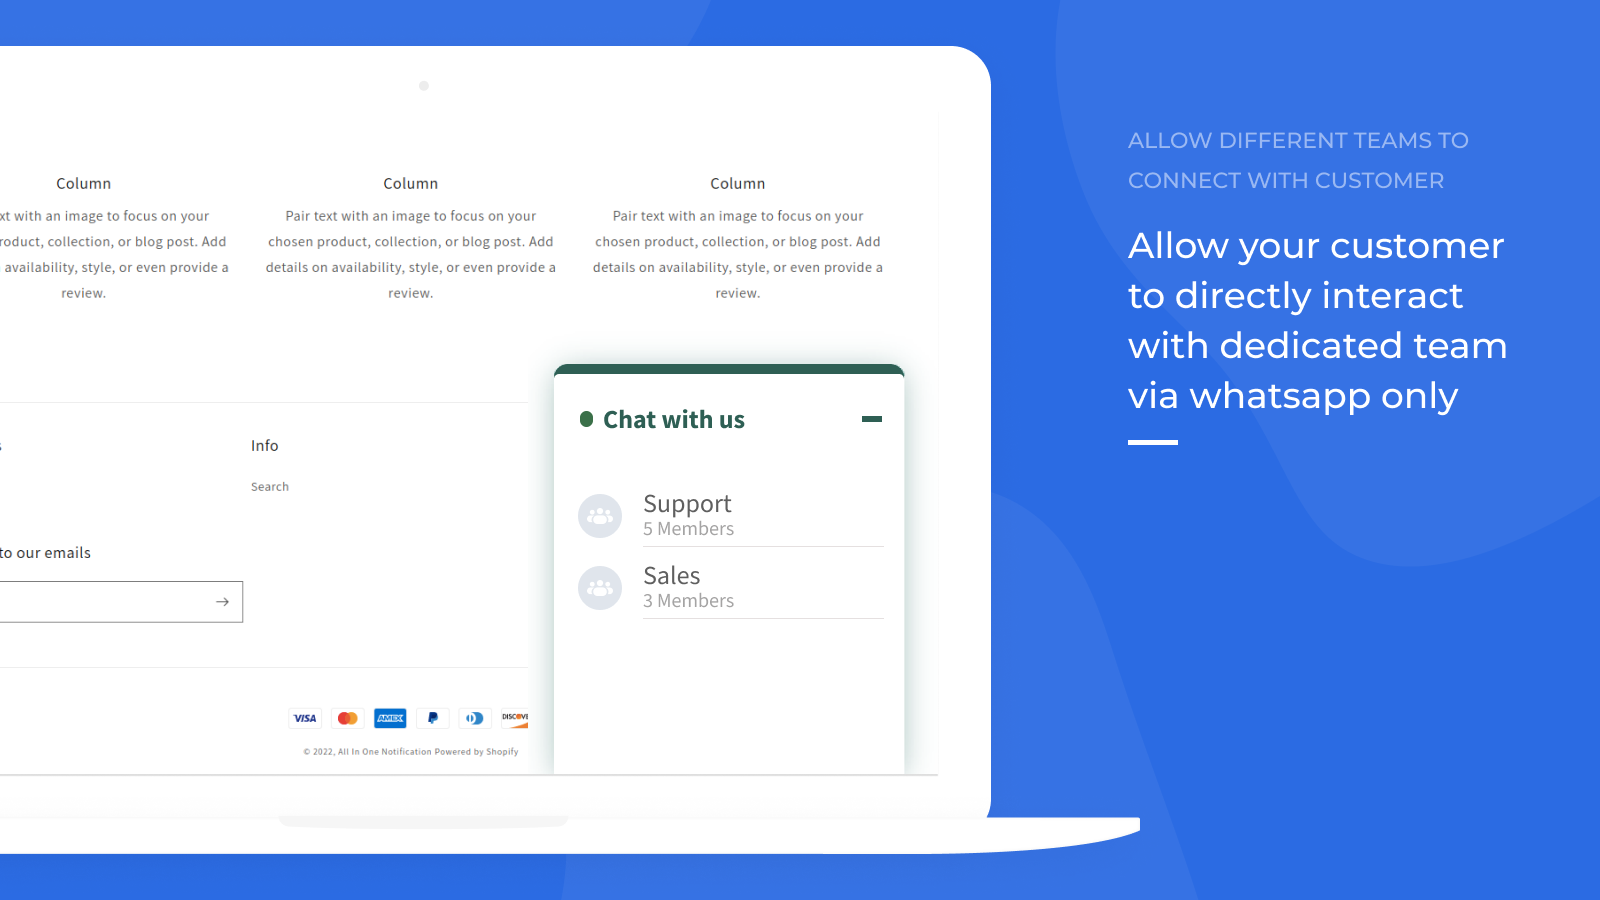 Allow Different Teams to connect with Customer